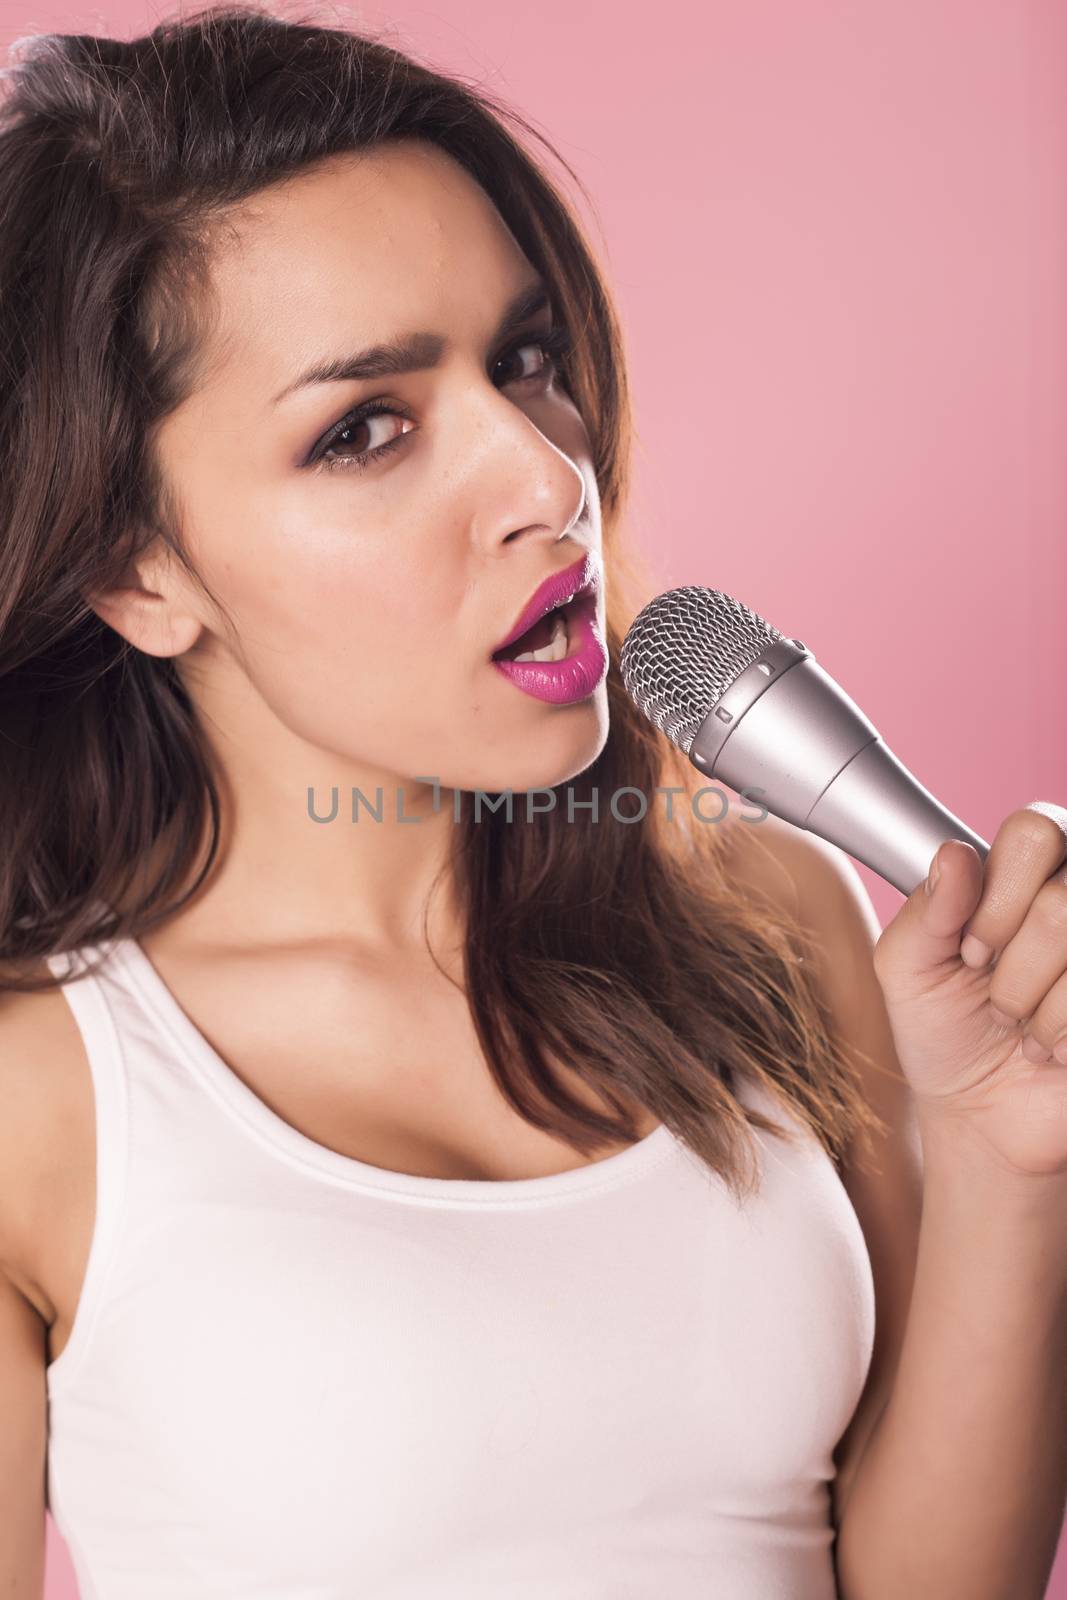 Portrait of a charming and beautiful woman singing with microphone in studio over pink background.







Portrait of a charming and beautiful woman singing with microphone in studio over pink background.